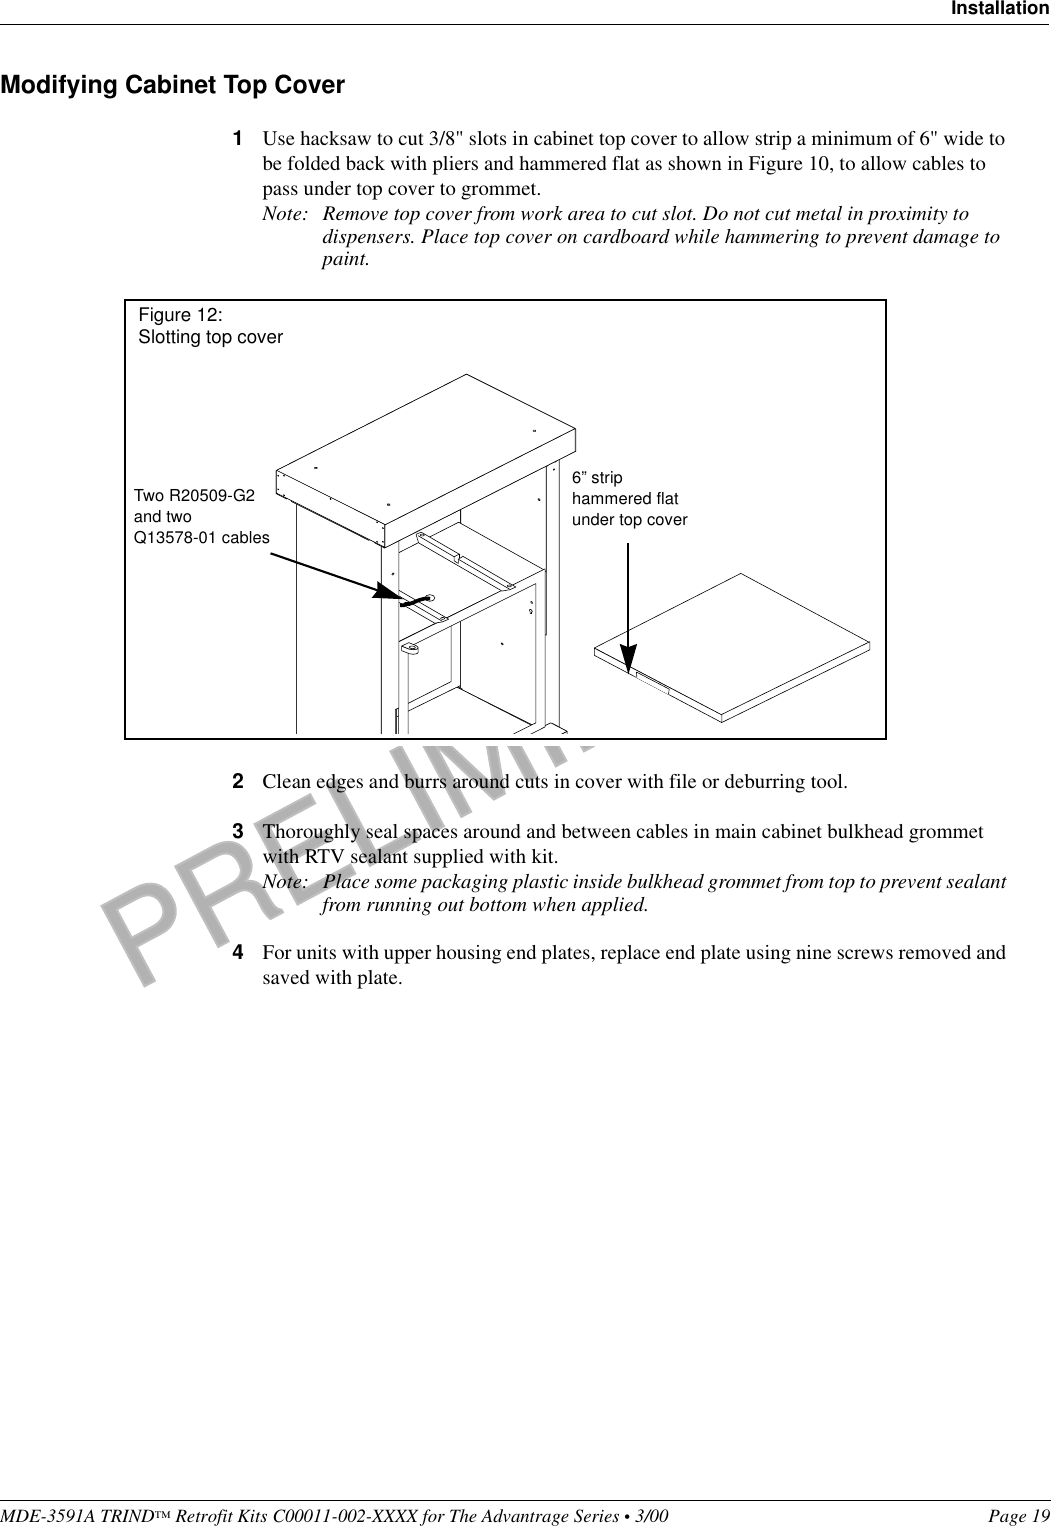 PRELIMINARYMDE-3591A TRIND™ Retrofit Kits C00011-002-XXXX for The Advantrage Series • 3/00  Page 19InstallationModifying Cabinet Top Cover1Use hacksaw to cut 3/8&quot; slots in cabinet top cover to allow strip a minimum of 6&quot; wide to be folded back with pliers and hammered flat as shown in Figure 10, to allow cables to pass under top cover to grommet. Note: Remove top cover from work area to cut slot. Do not cut metal in proximity to dispensers. Place top cover on cardboard while hammering to prevent damage to paint.2Clean edges and burrs around cuts in cover with file or deburring tool. 3Thoroughly seal spaces around and between cables in main cabinet bulkhead grommet with RTV sealant supplied with kit.Note: Place some packaging plastic inside bulkhead grommet from top to prevent sealant from running out bottom when applied.4For units with upper housing end plates, replace end plate using nine screws removed and saved with plate.6” strip hammered flat under top coverTwo R20509-G2 and two Q13578-01 cablesFigure 12: Slotting top cover